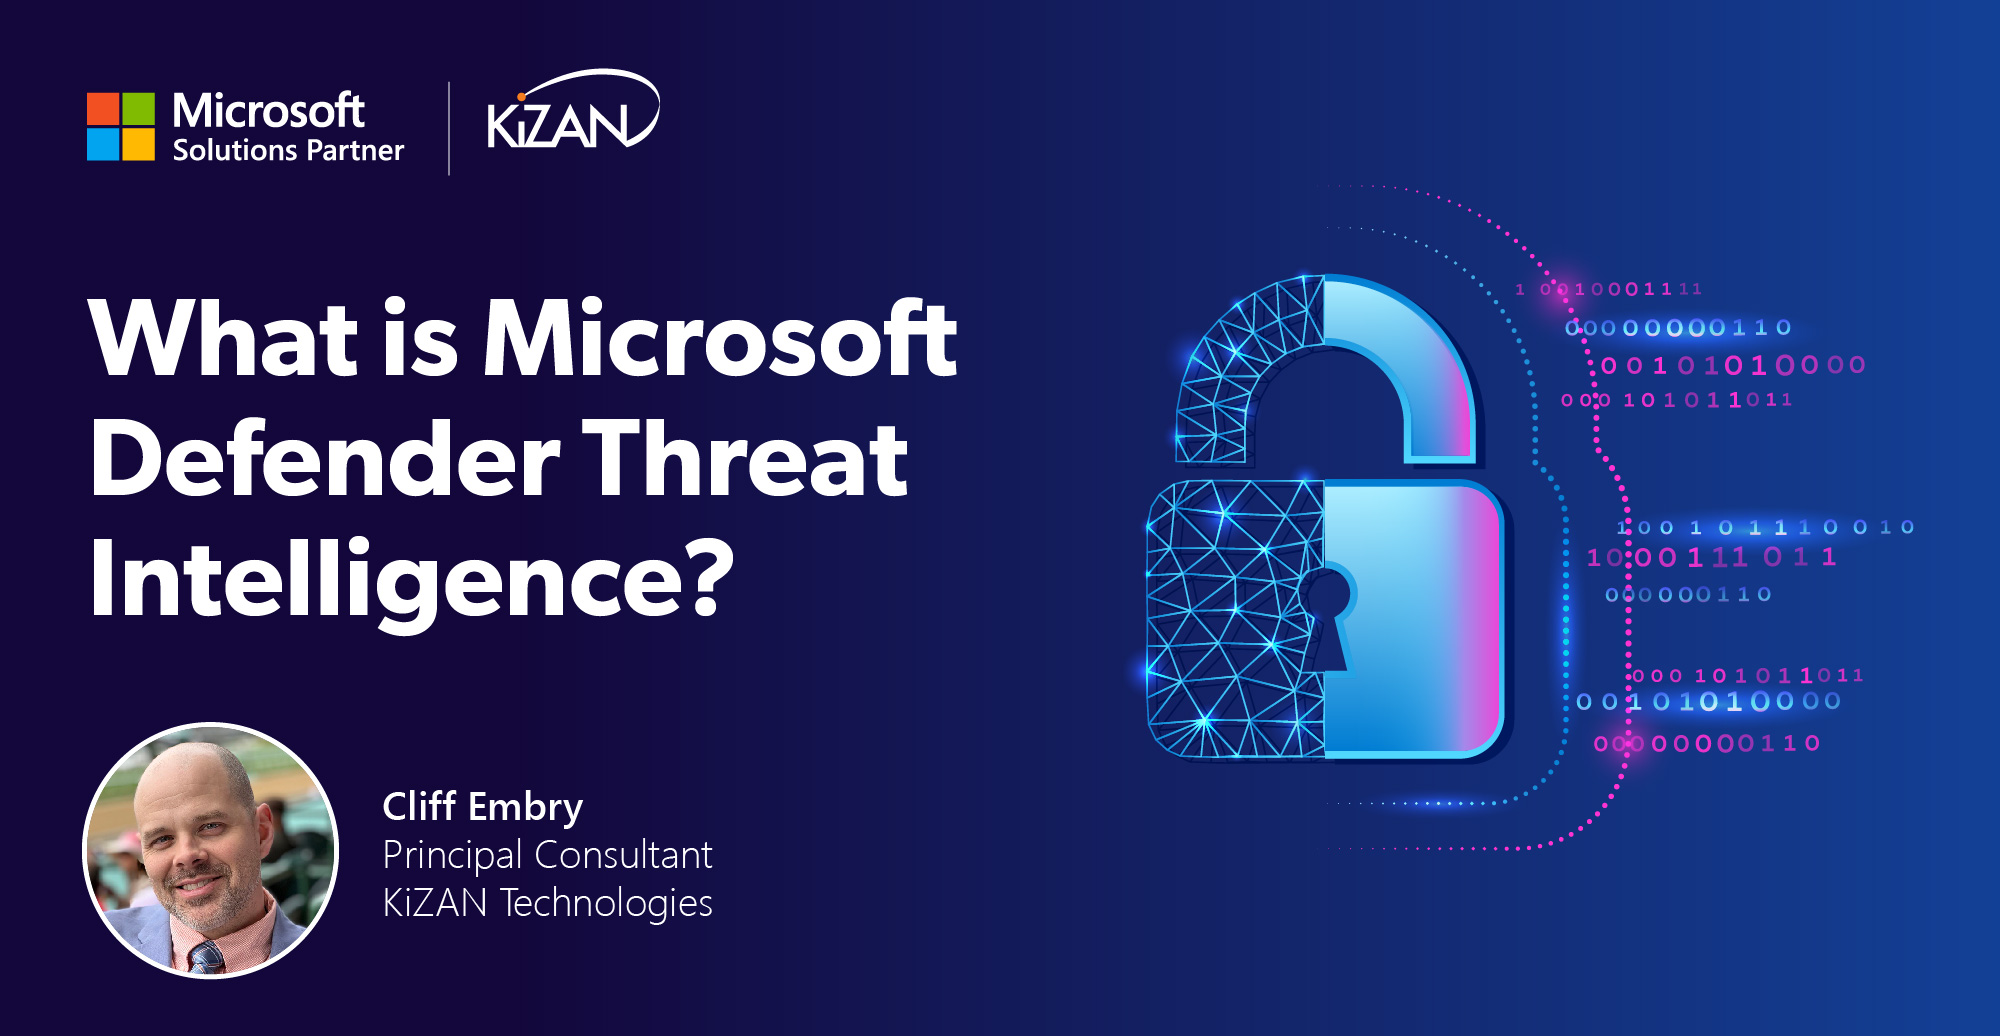 What is Microsoft Defender Threat Intelligence?